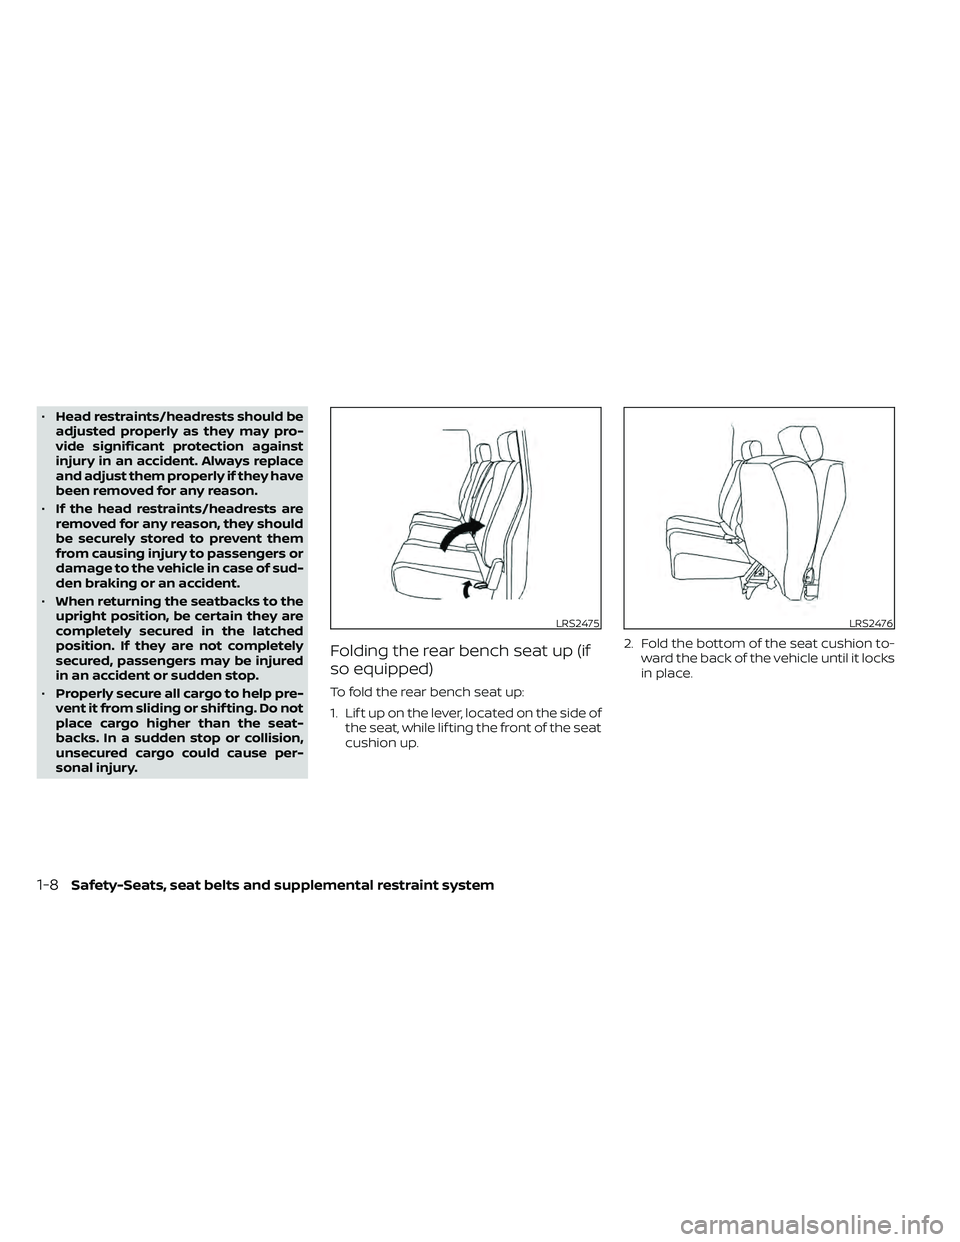 NISSAN FRONTIER 2021  Owners Manual •Head restraints/headrests should be
adjusted properly as they may pro-
vide significant protection against
injury in an accident. Always replace
and adjust them properly if they have
been removed f